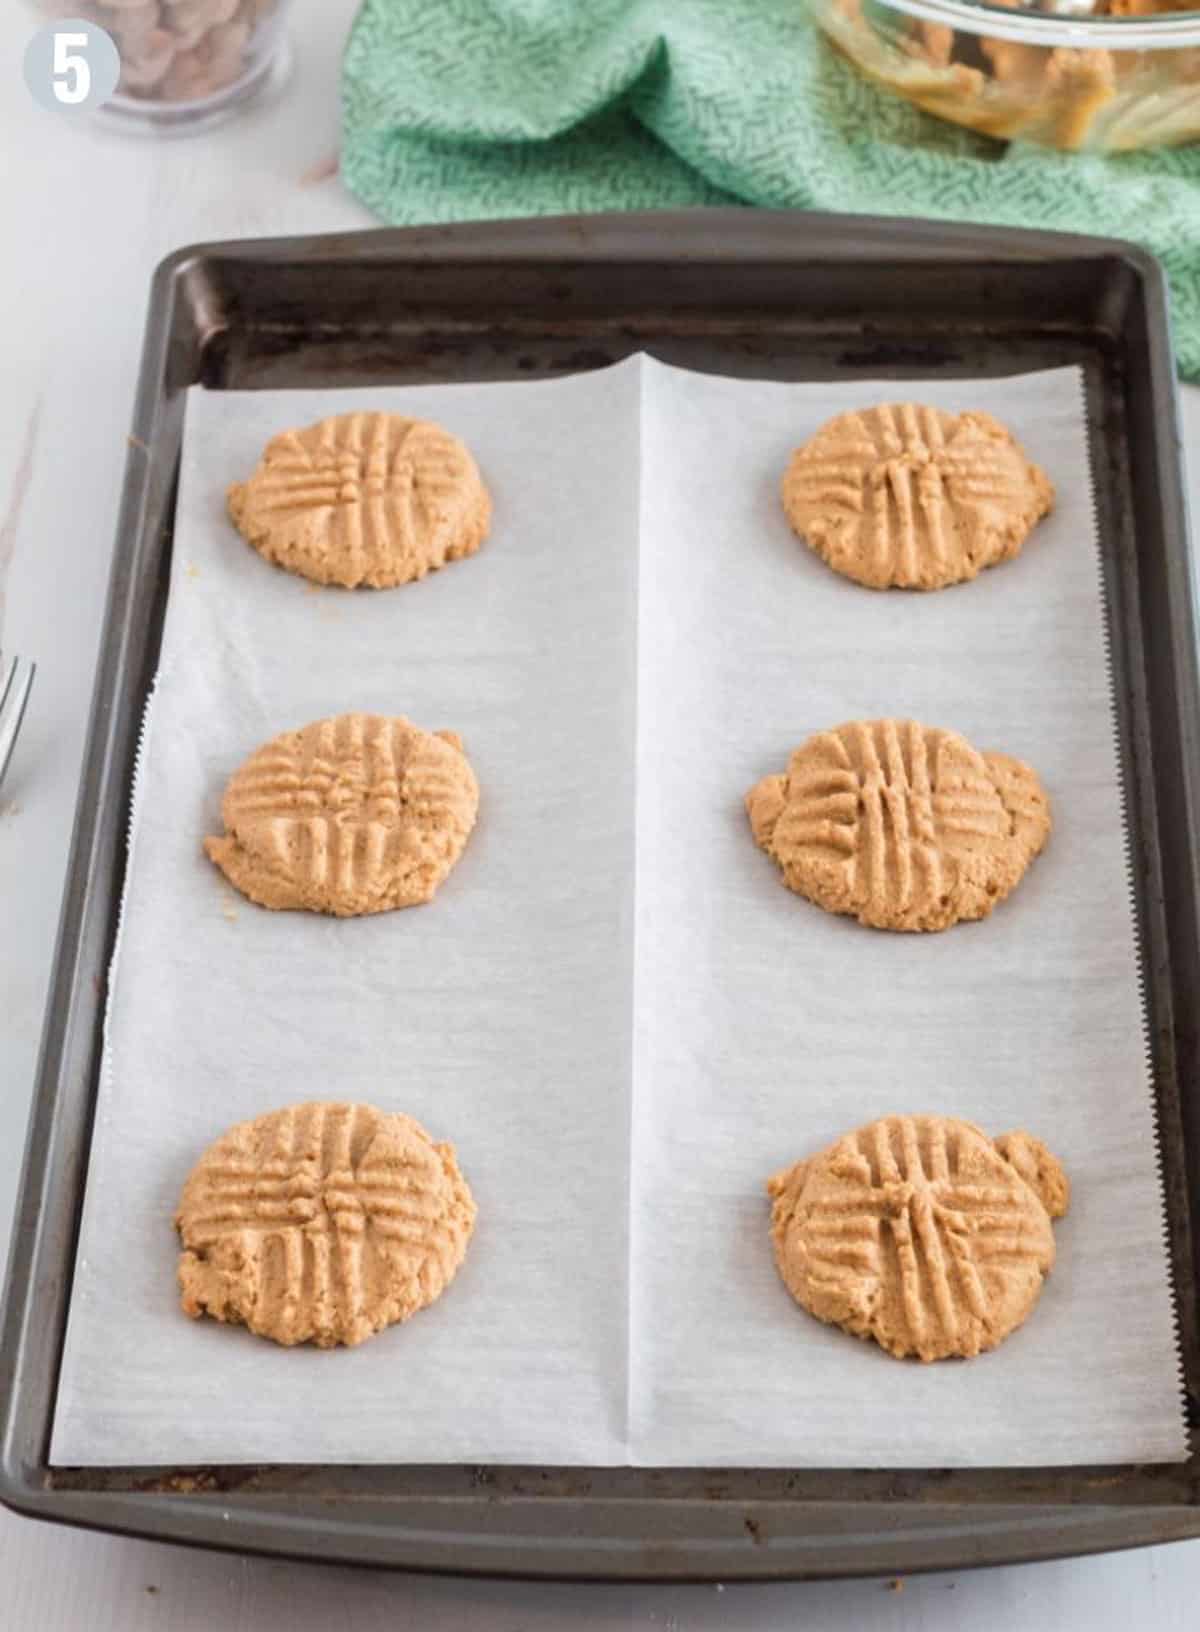 A cookie sheet lined with parchment paper and some cookies on it.